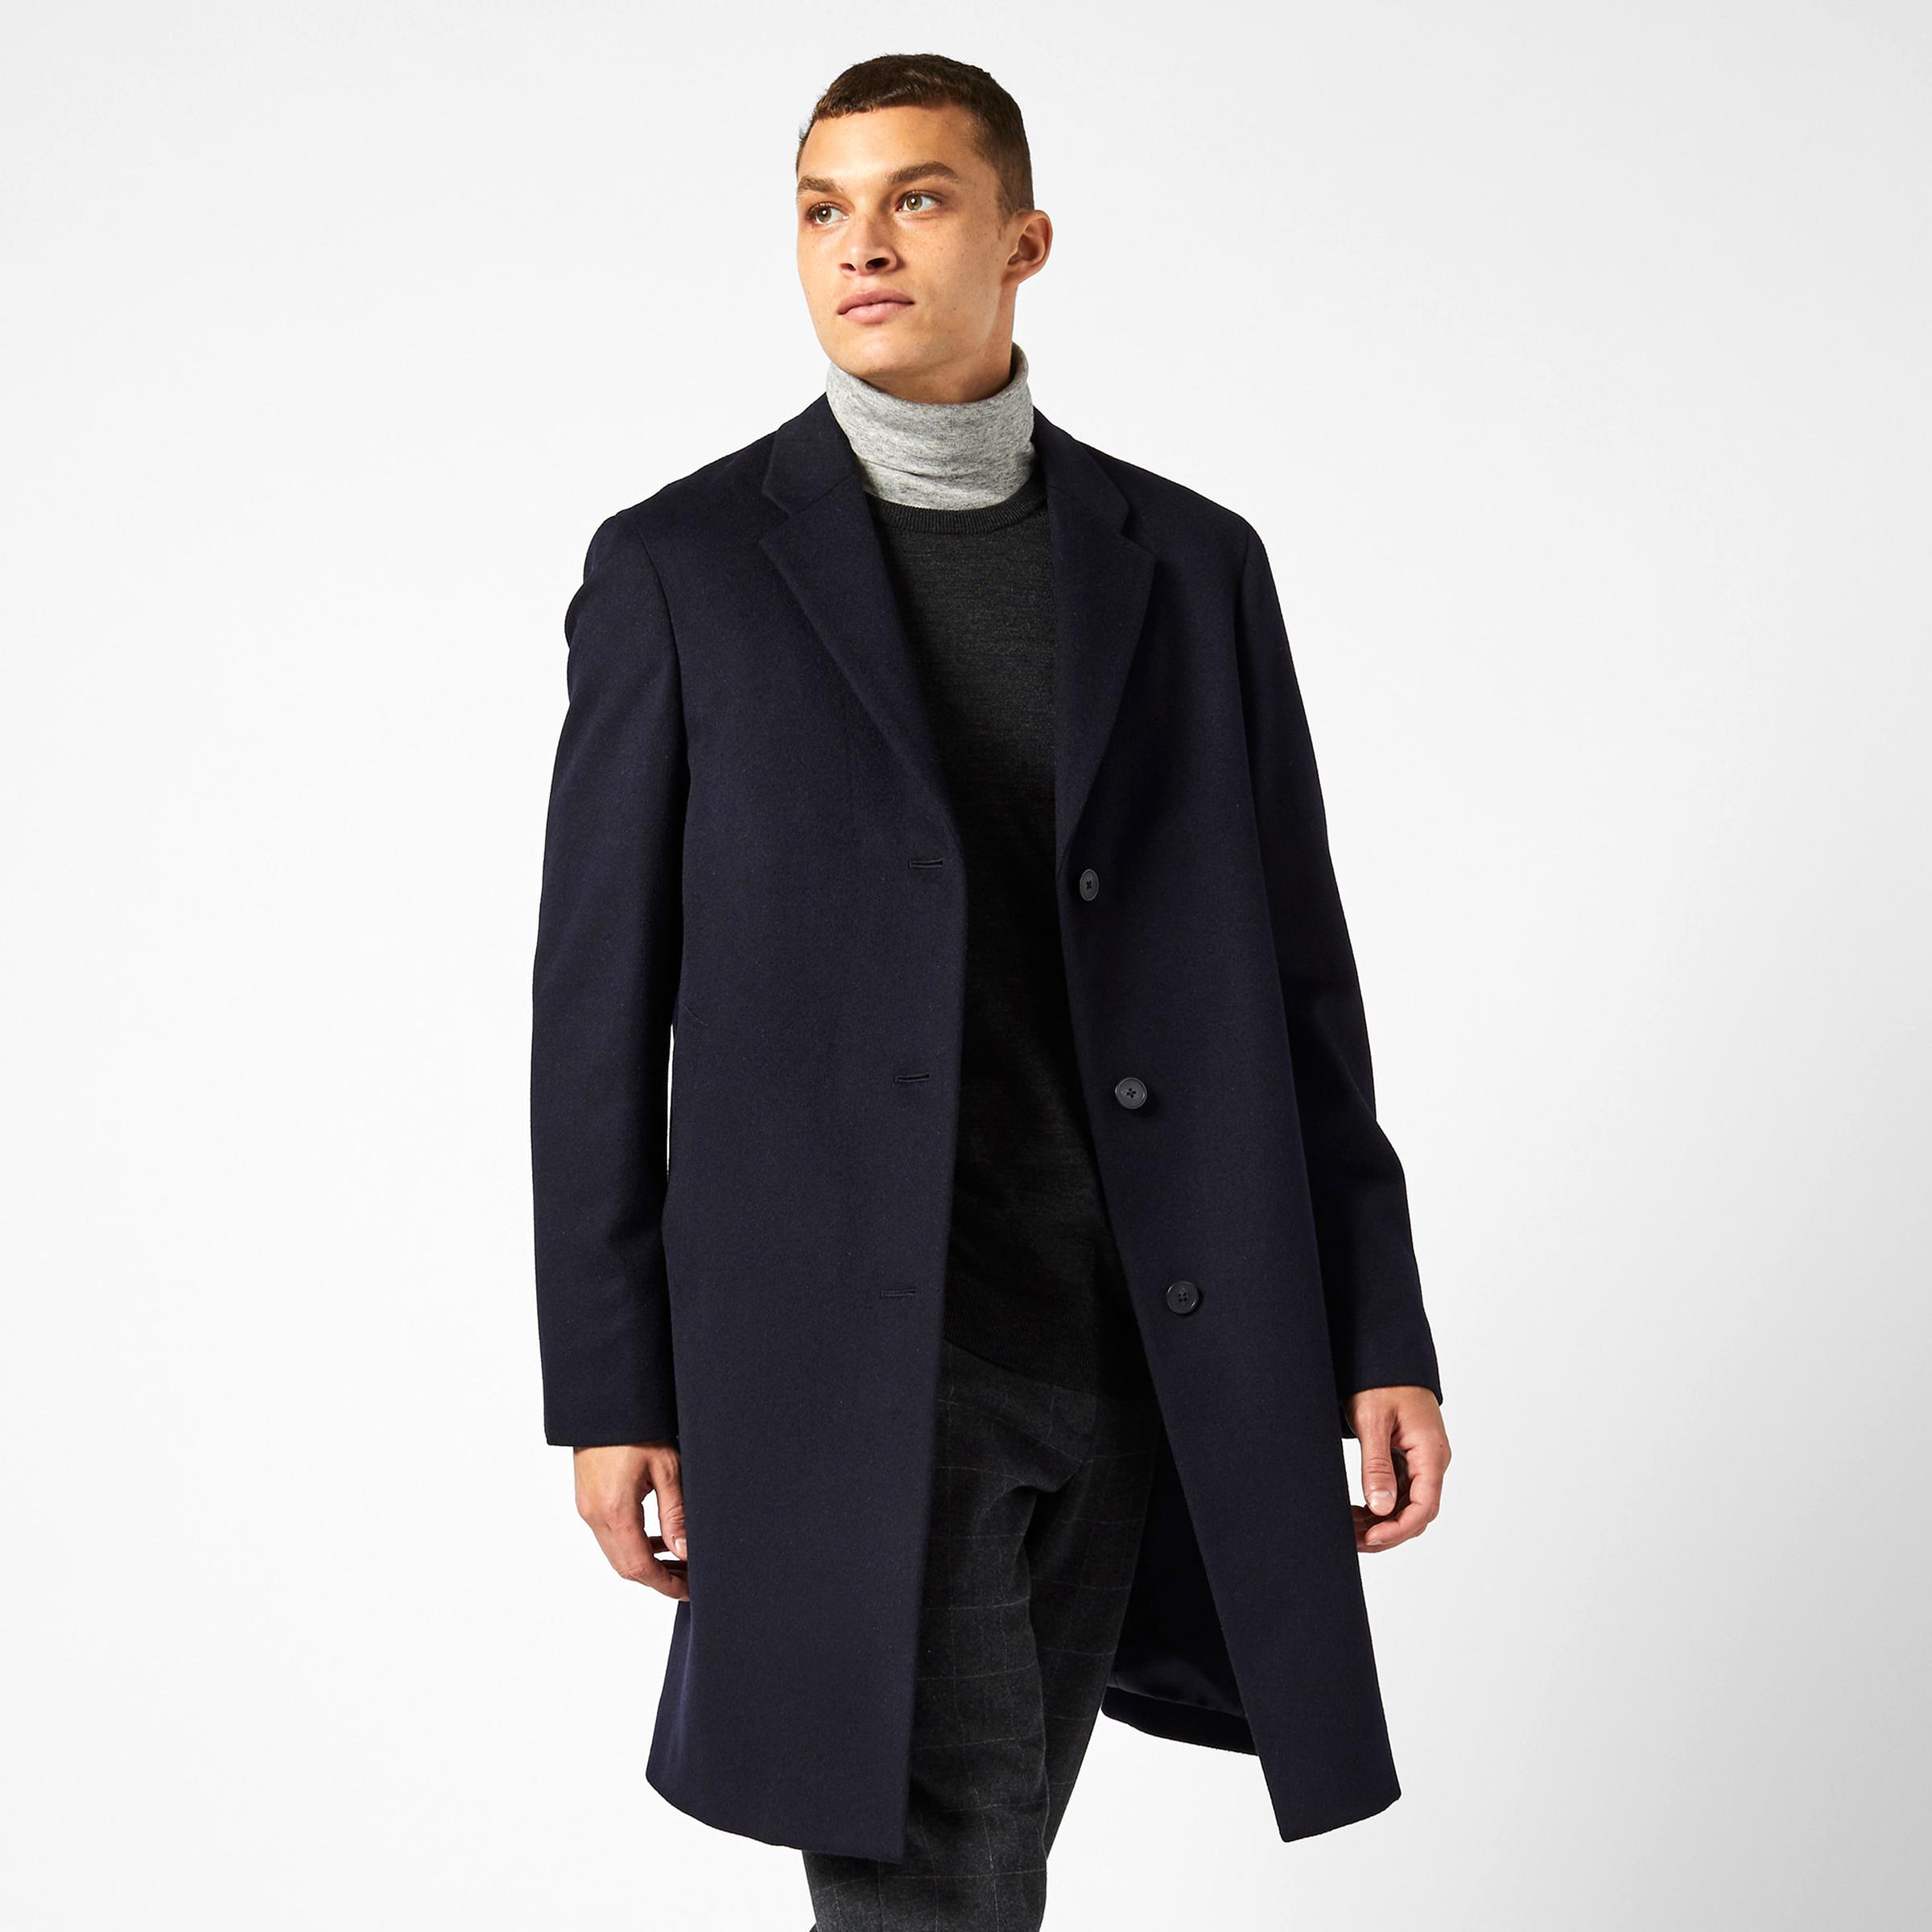 Mens Cashmere Coat for sale in UK | 93 used Mens Cashmere Coats